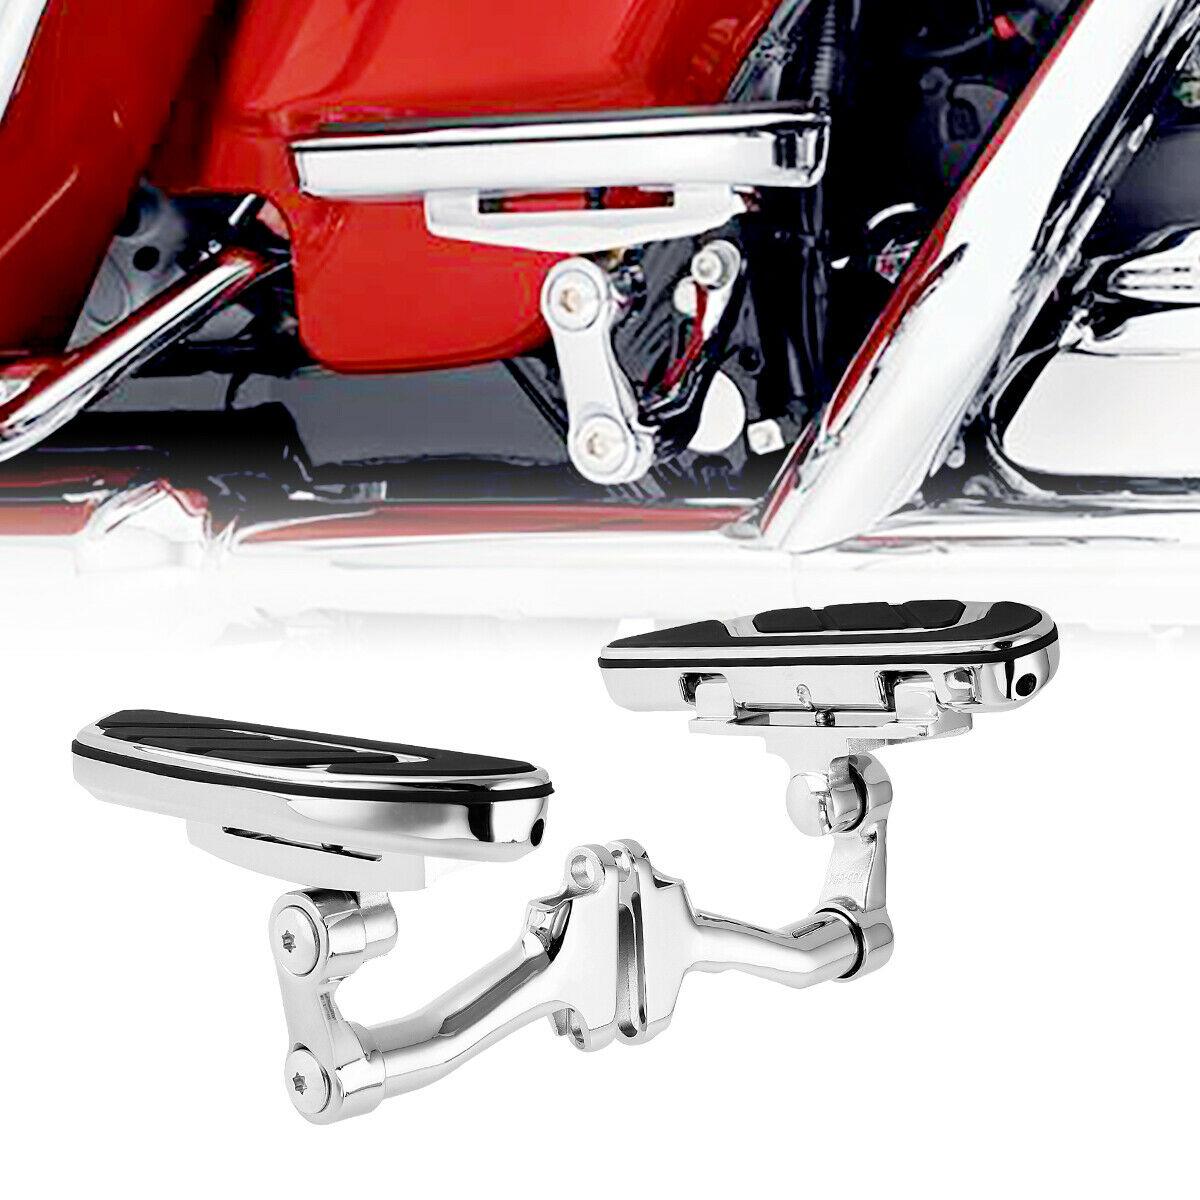 Rear Airflow Floorboard Footboard Bracket For Harley Touring Road Glide King 93+ - Moto Life Products